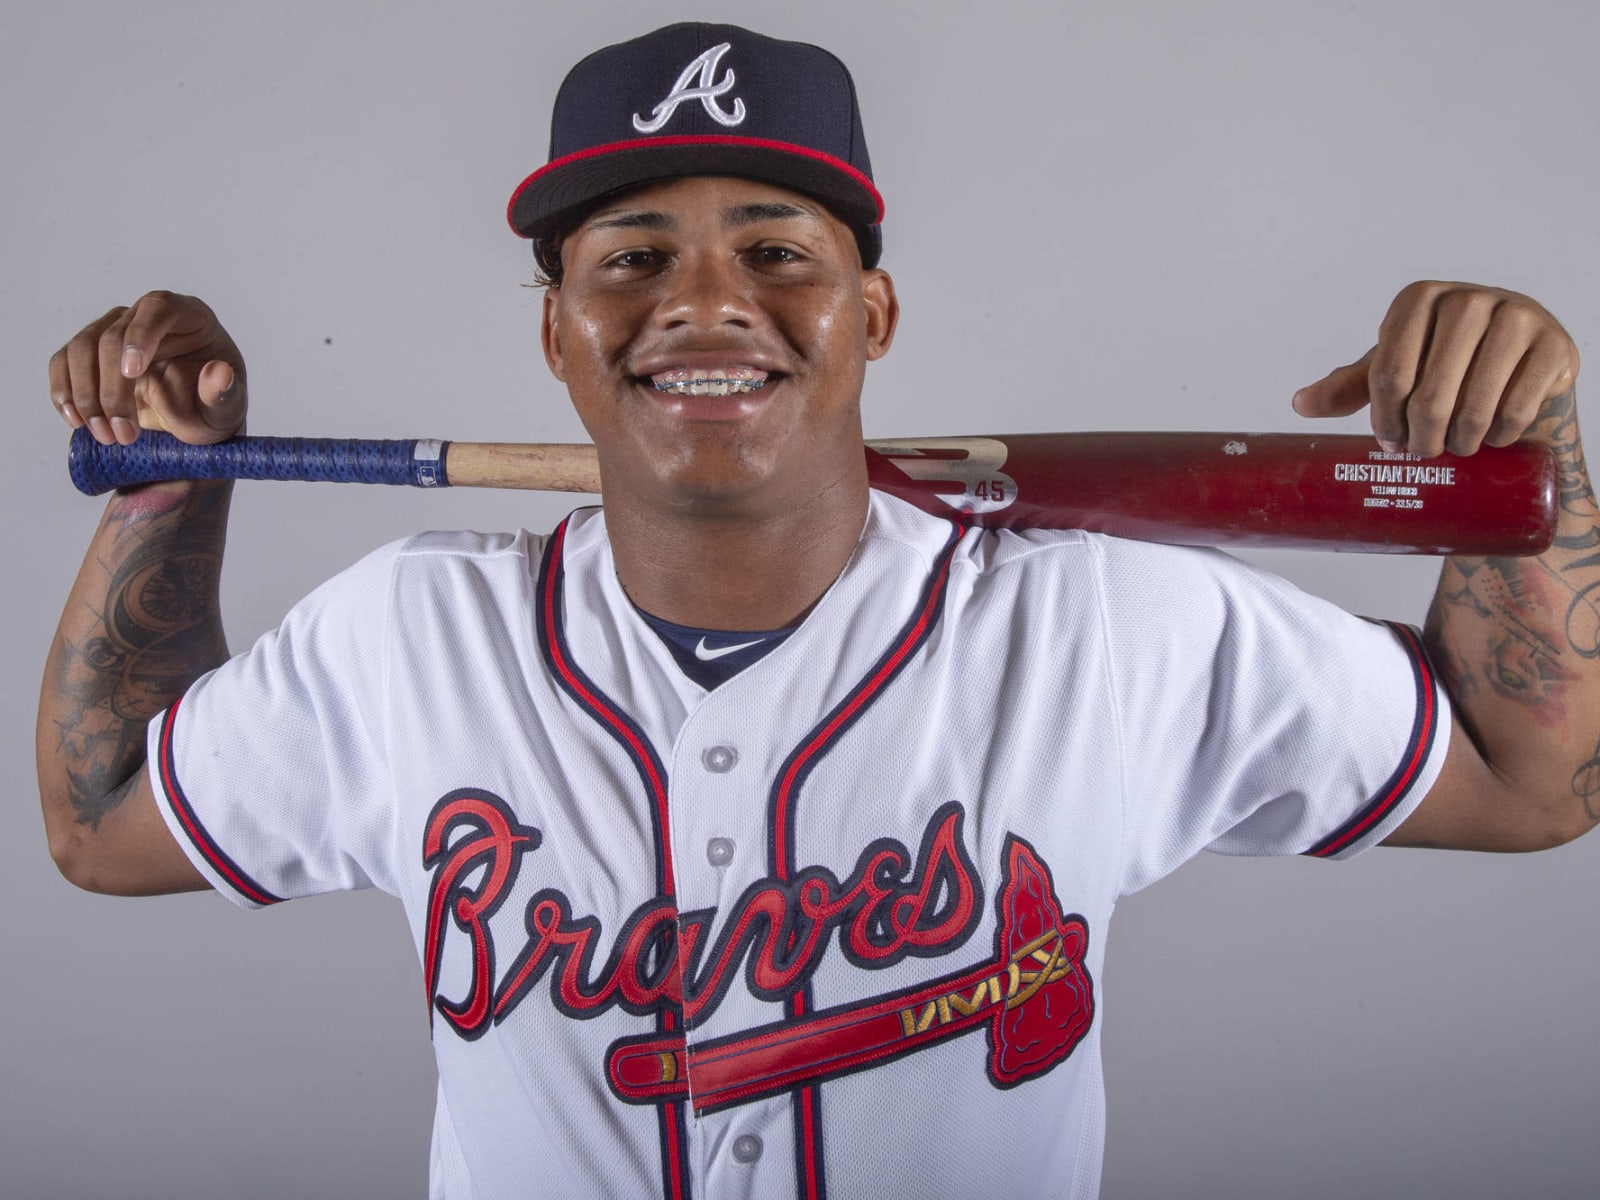 Braves: What are realistic expectations for Cristian Pache in 2022? 